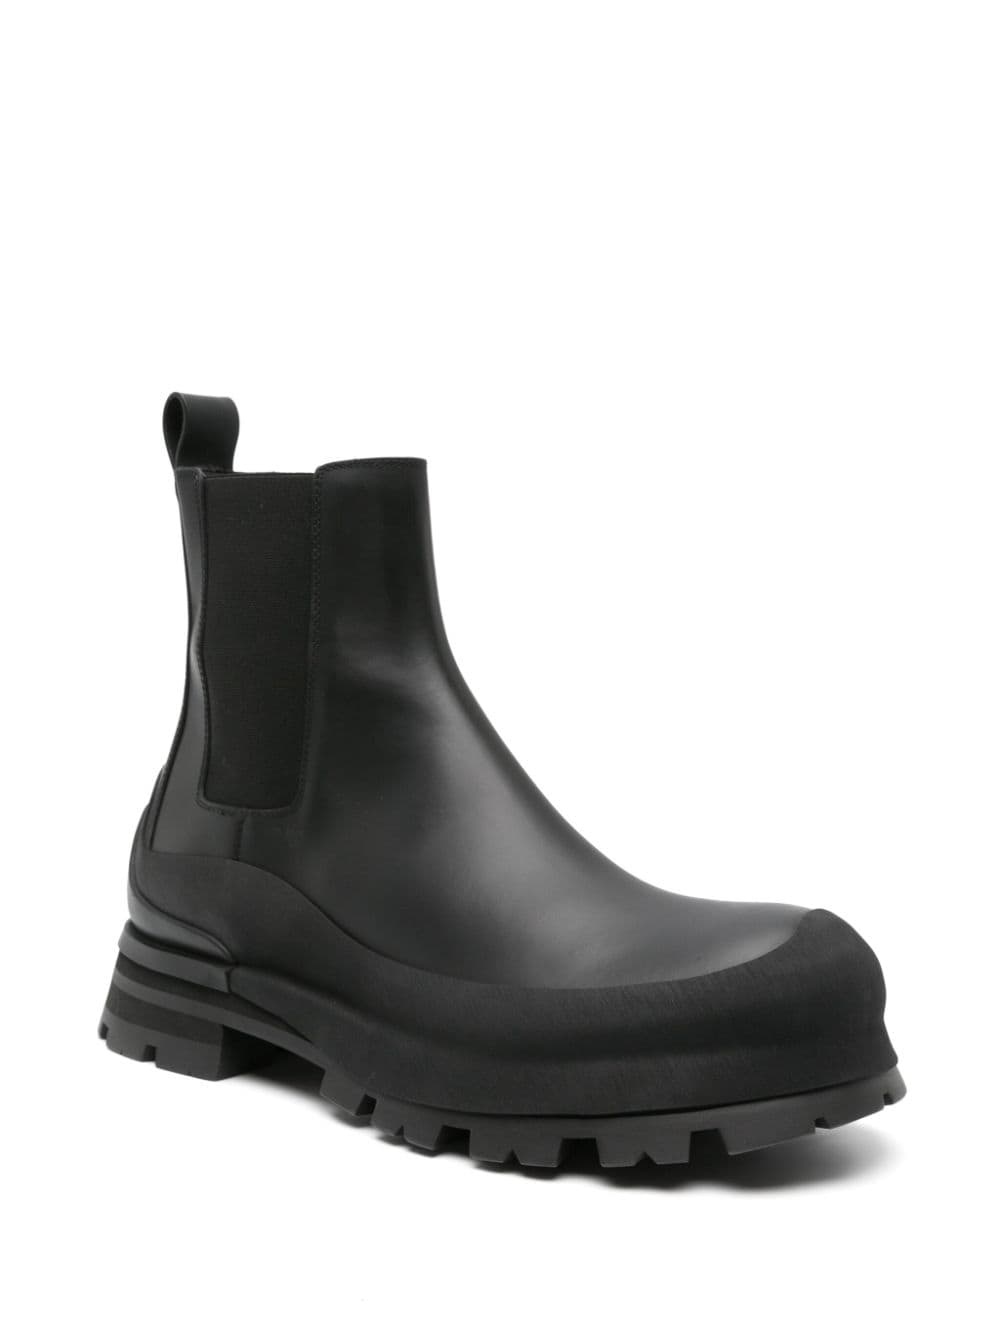 Wander leather chelsea boots - 2